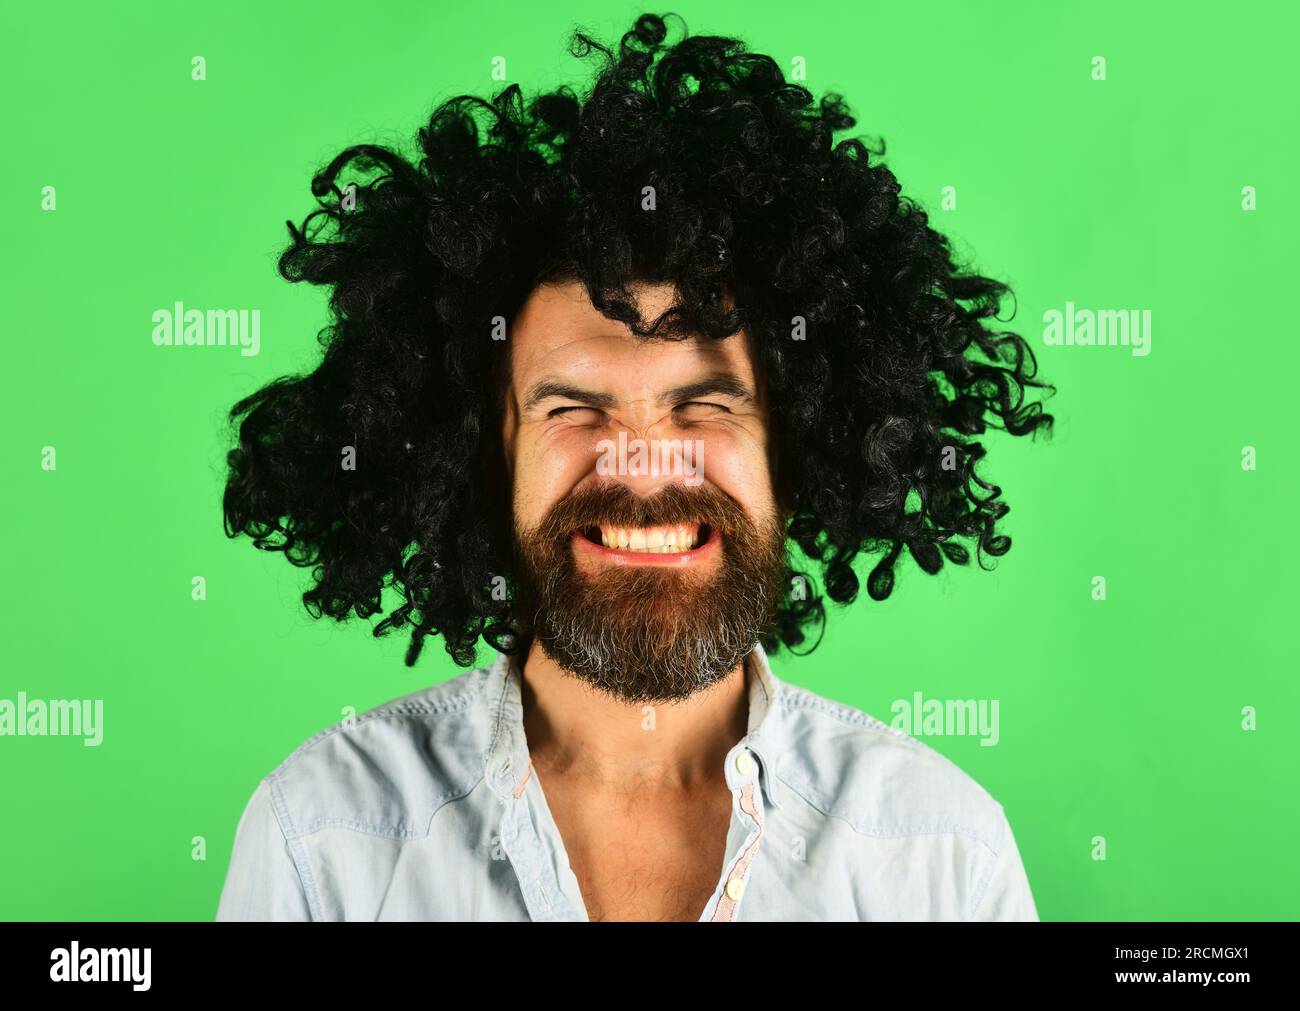 Funny man in black wig. Man with beard and mustache in curly periwig. Bearded hipster in black curly afro wig. Barbershop. Stylish guy with black hair Stock Photo